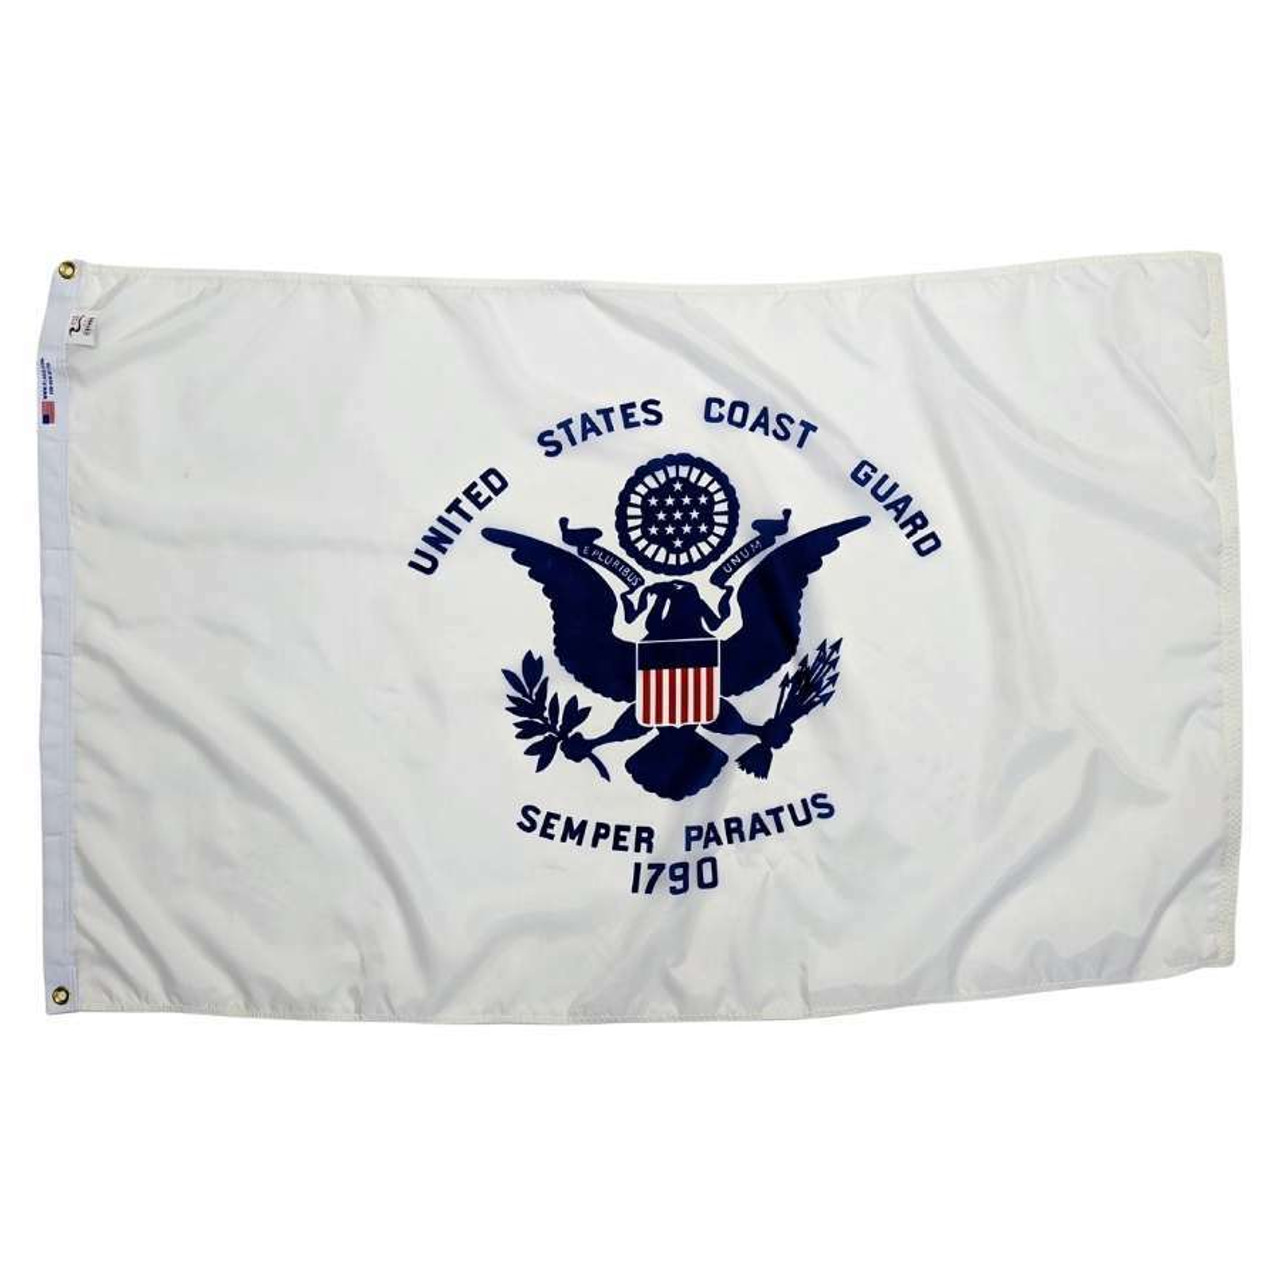 The United States Coast Guard flag. White field with dark blue “United States Coast Guard” over a dark blue eagle and shield. Shield has vertical red and white stripes with a blue cap. Slogan Semper Paratus 1790 is under the eagle. 